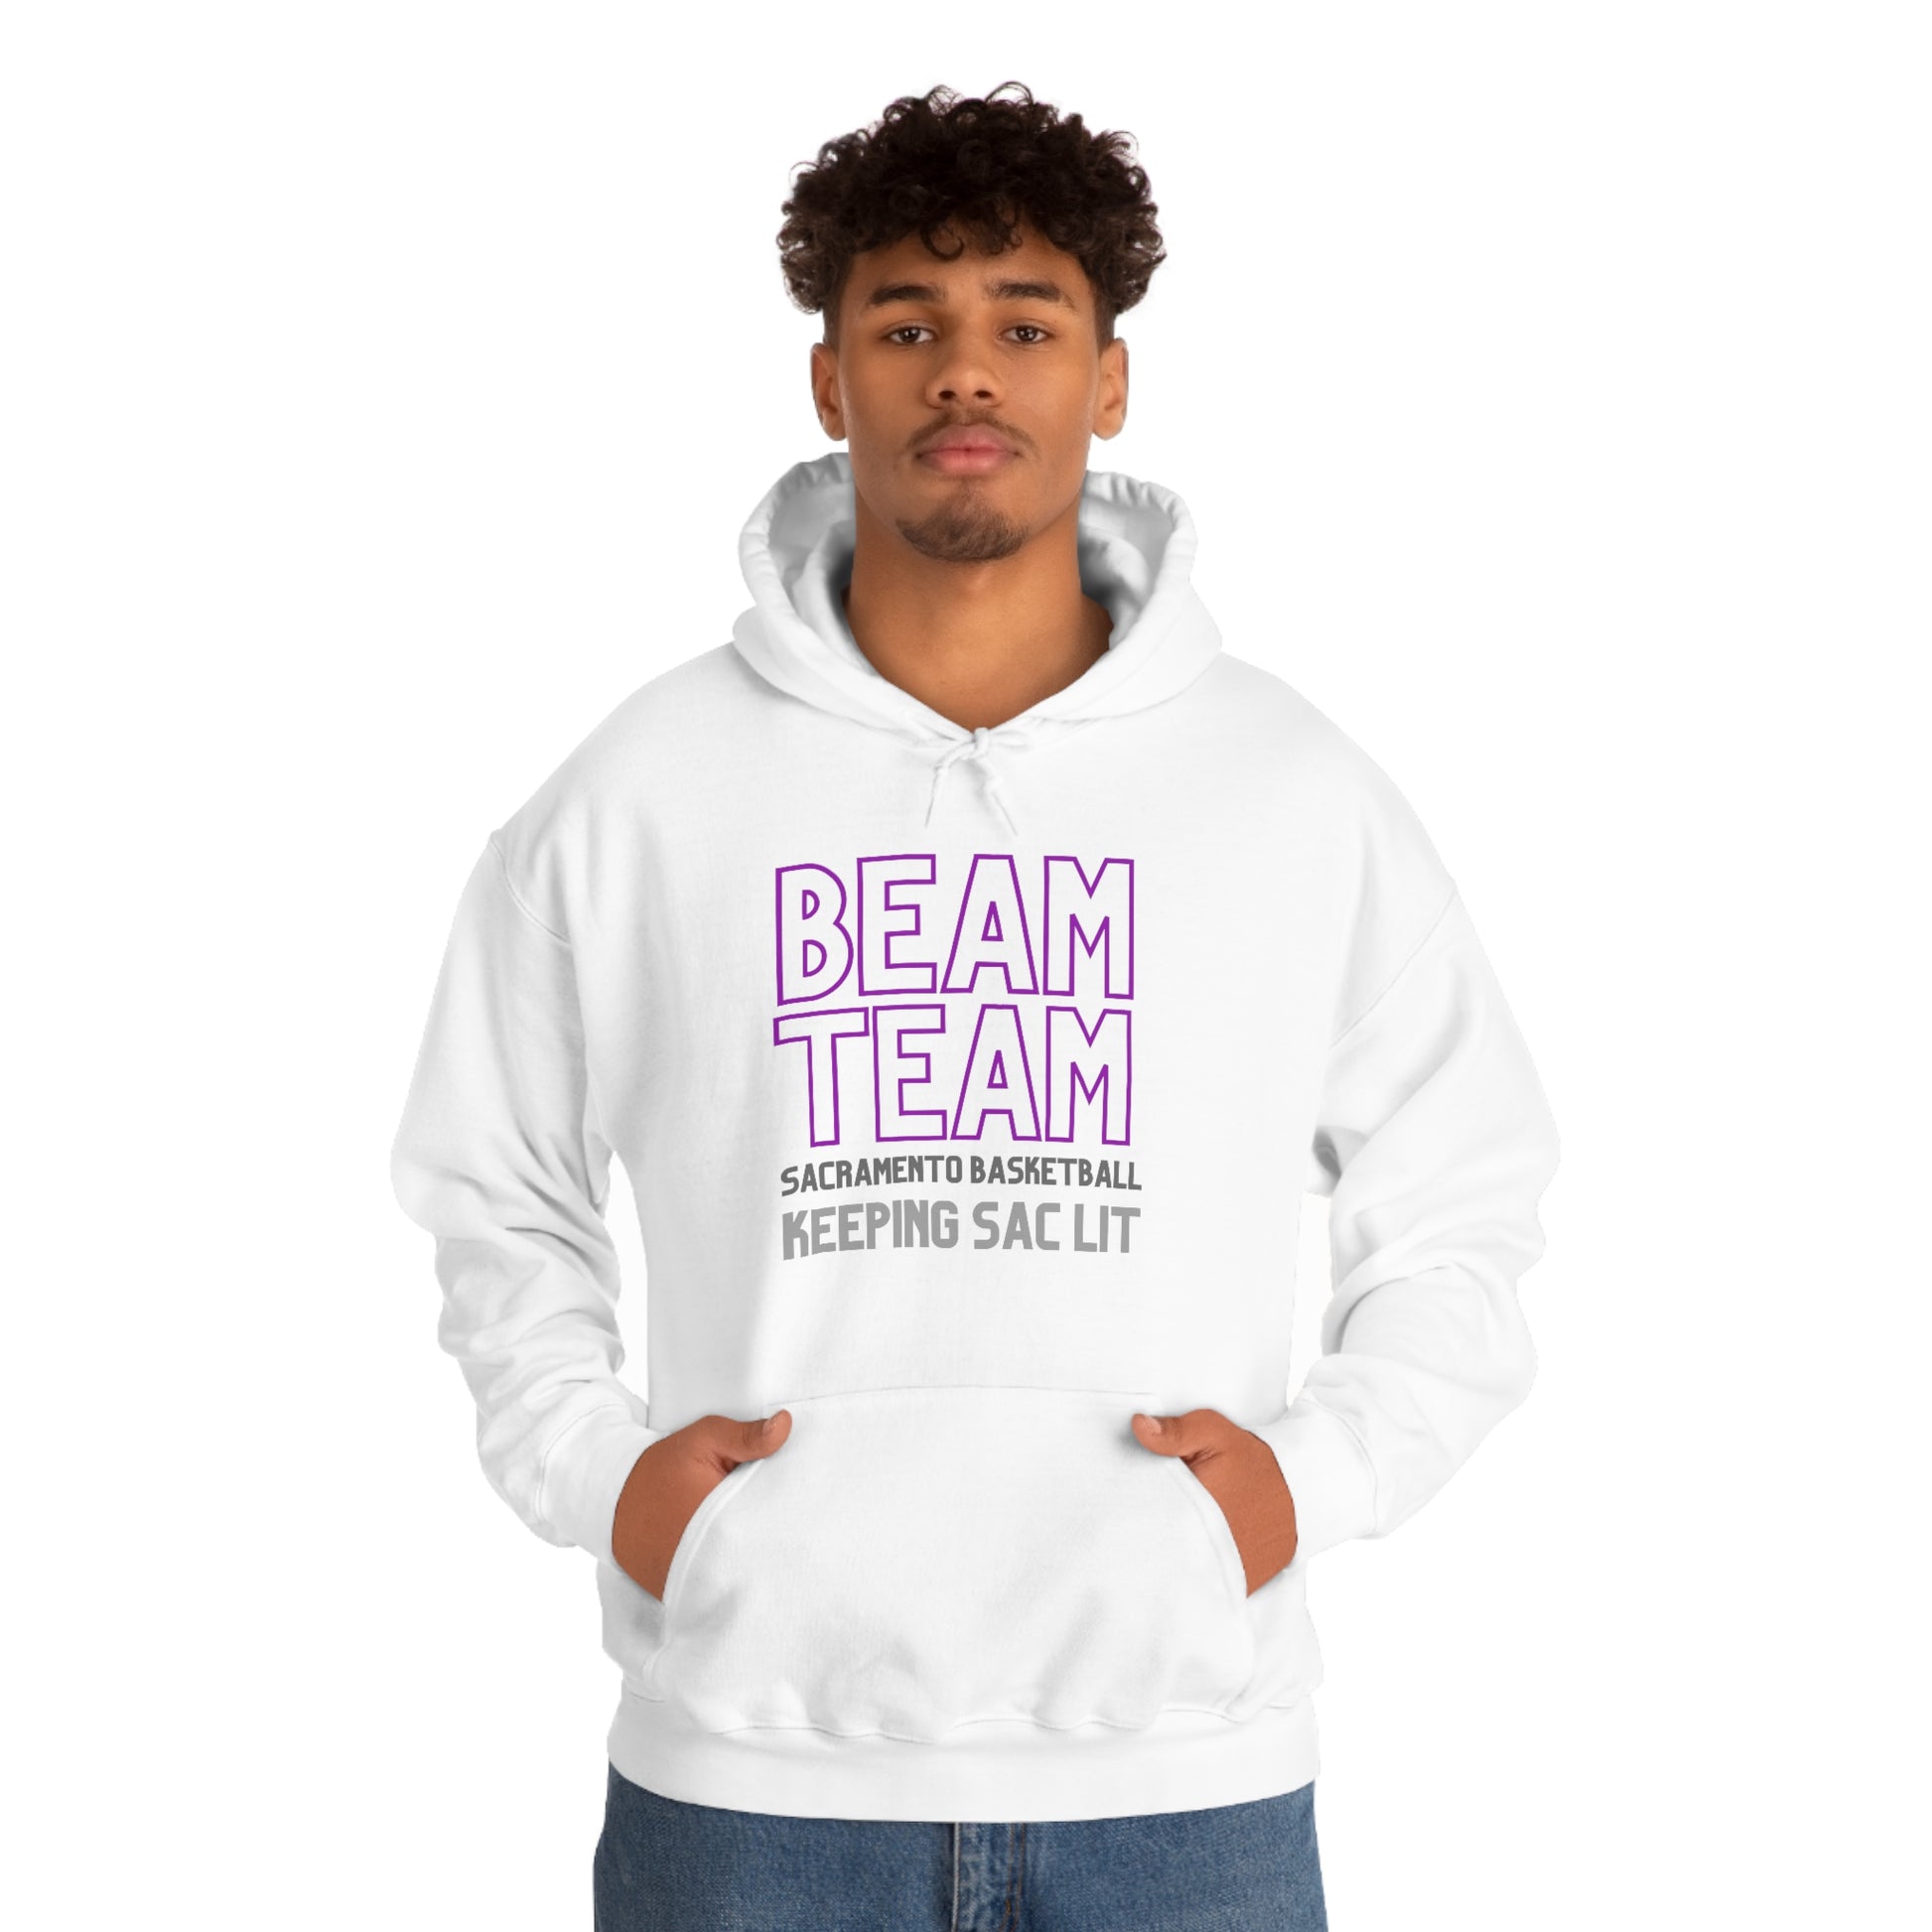 Beam Team Sacramento Basketball, Unisex Hoodie, Kings Basketball Fan, Light the Beam, Sacramento Team Fan, Plus Size,Beam Team, Light the Beam! Celebrate another W - WIN - for your Kings Basketball team in this comfortable, cool hoodie. Perfect to keep you warm at the game or the day after another W. It's going to be an epic season for our Sacramento Basketball team - show off your Sac-Town pride